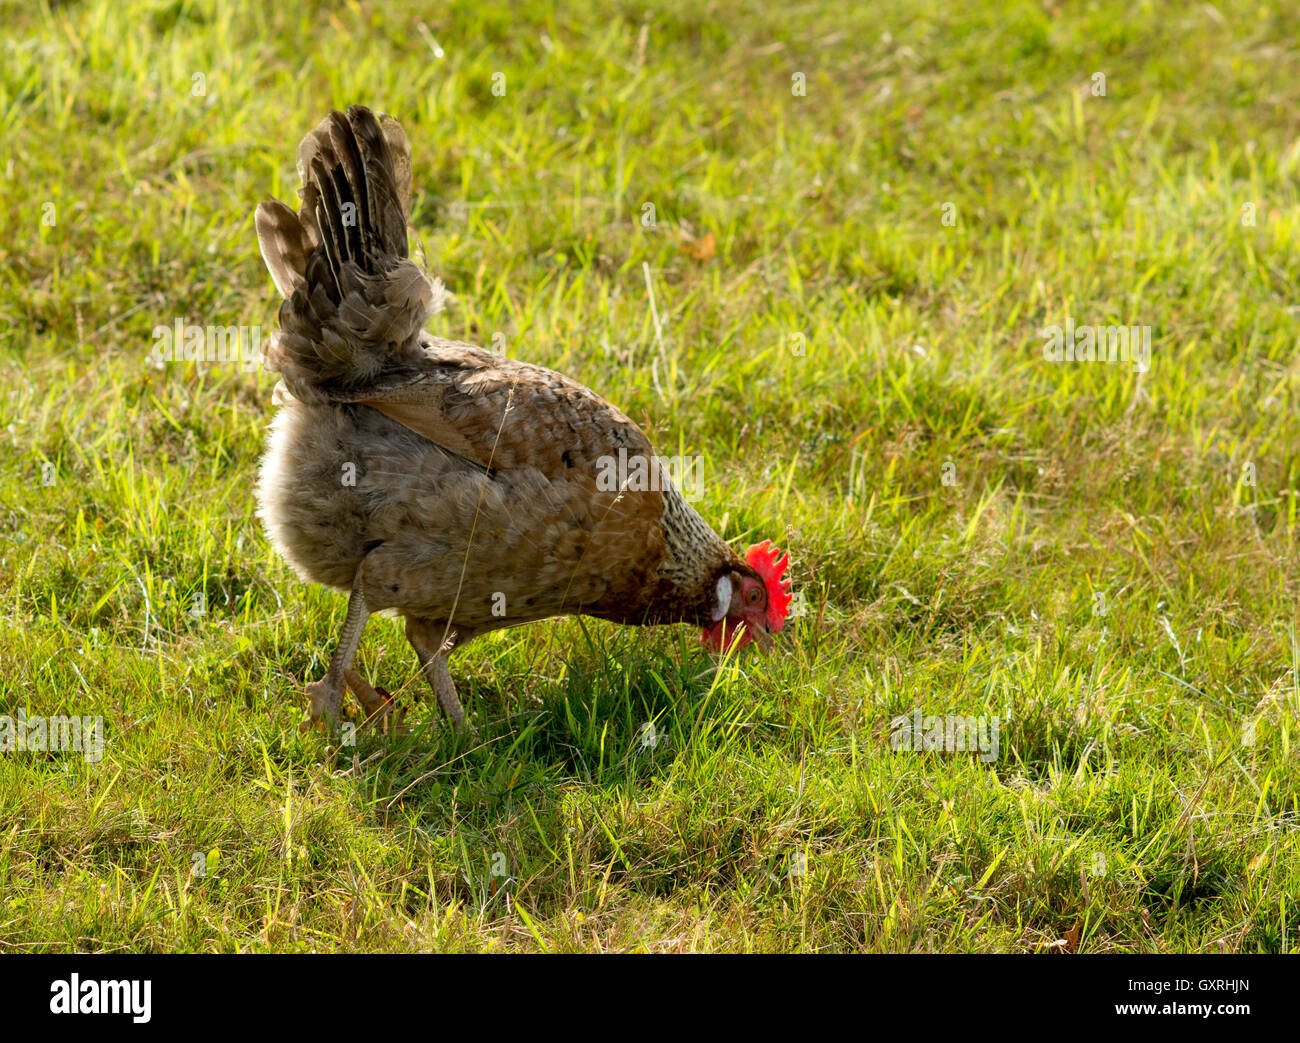 Red crested speckled brown hen pecking in the grass for food. Stock Photo